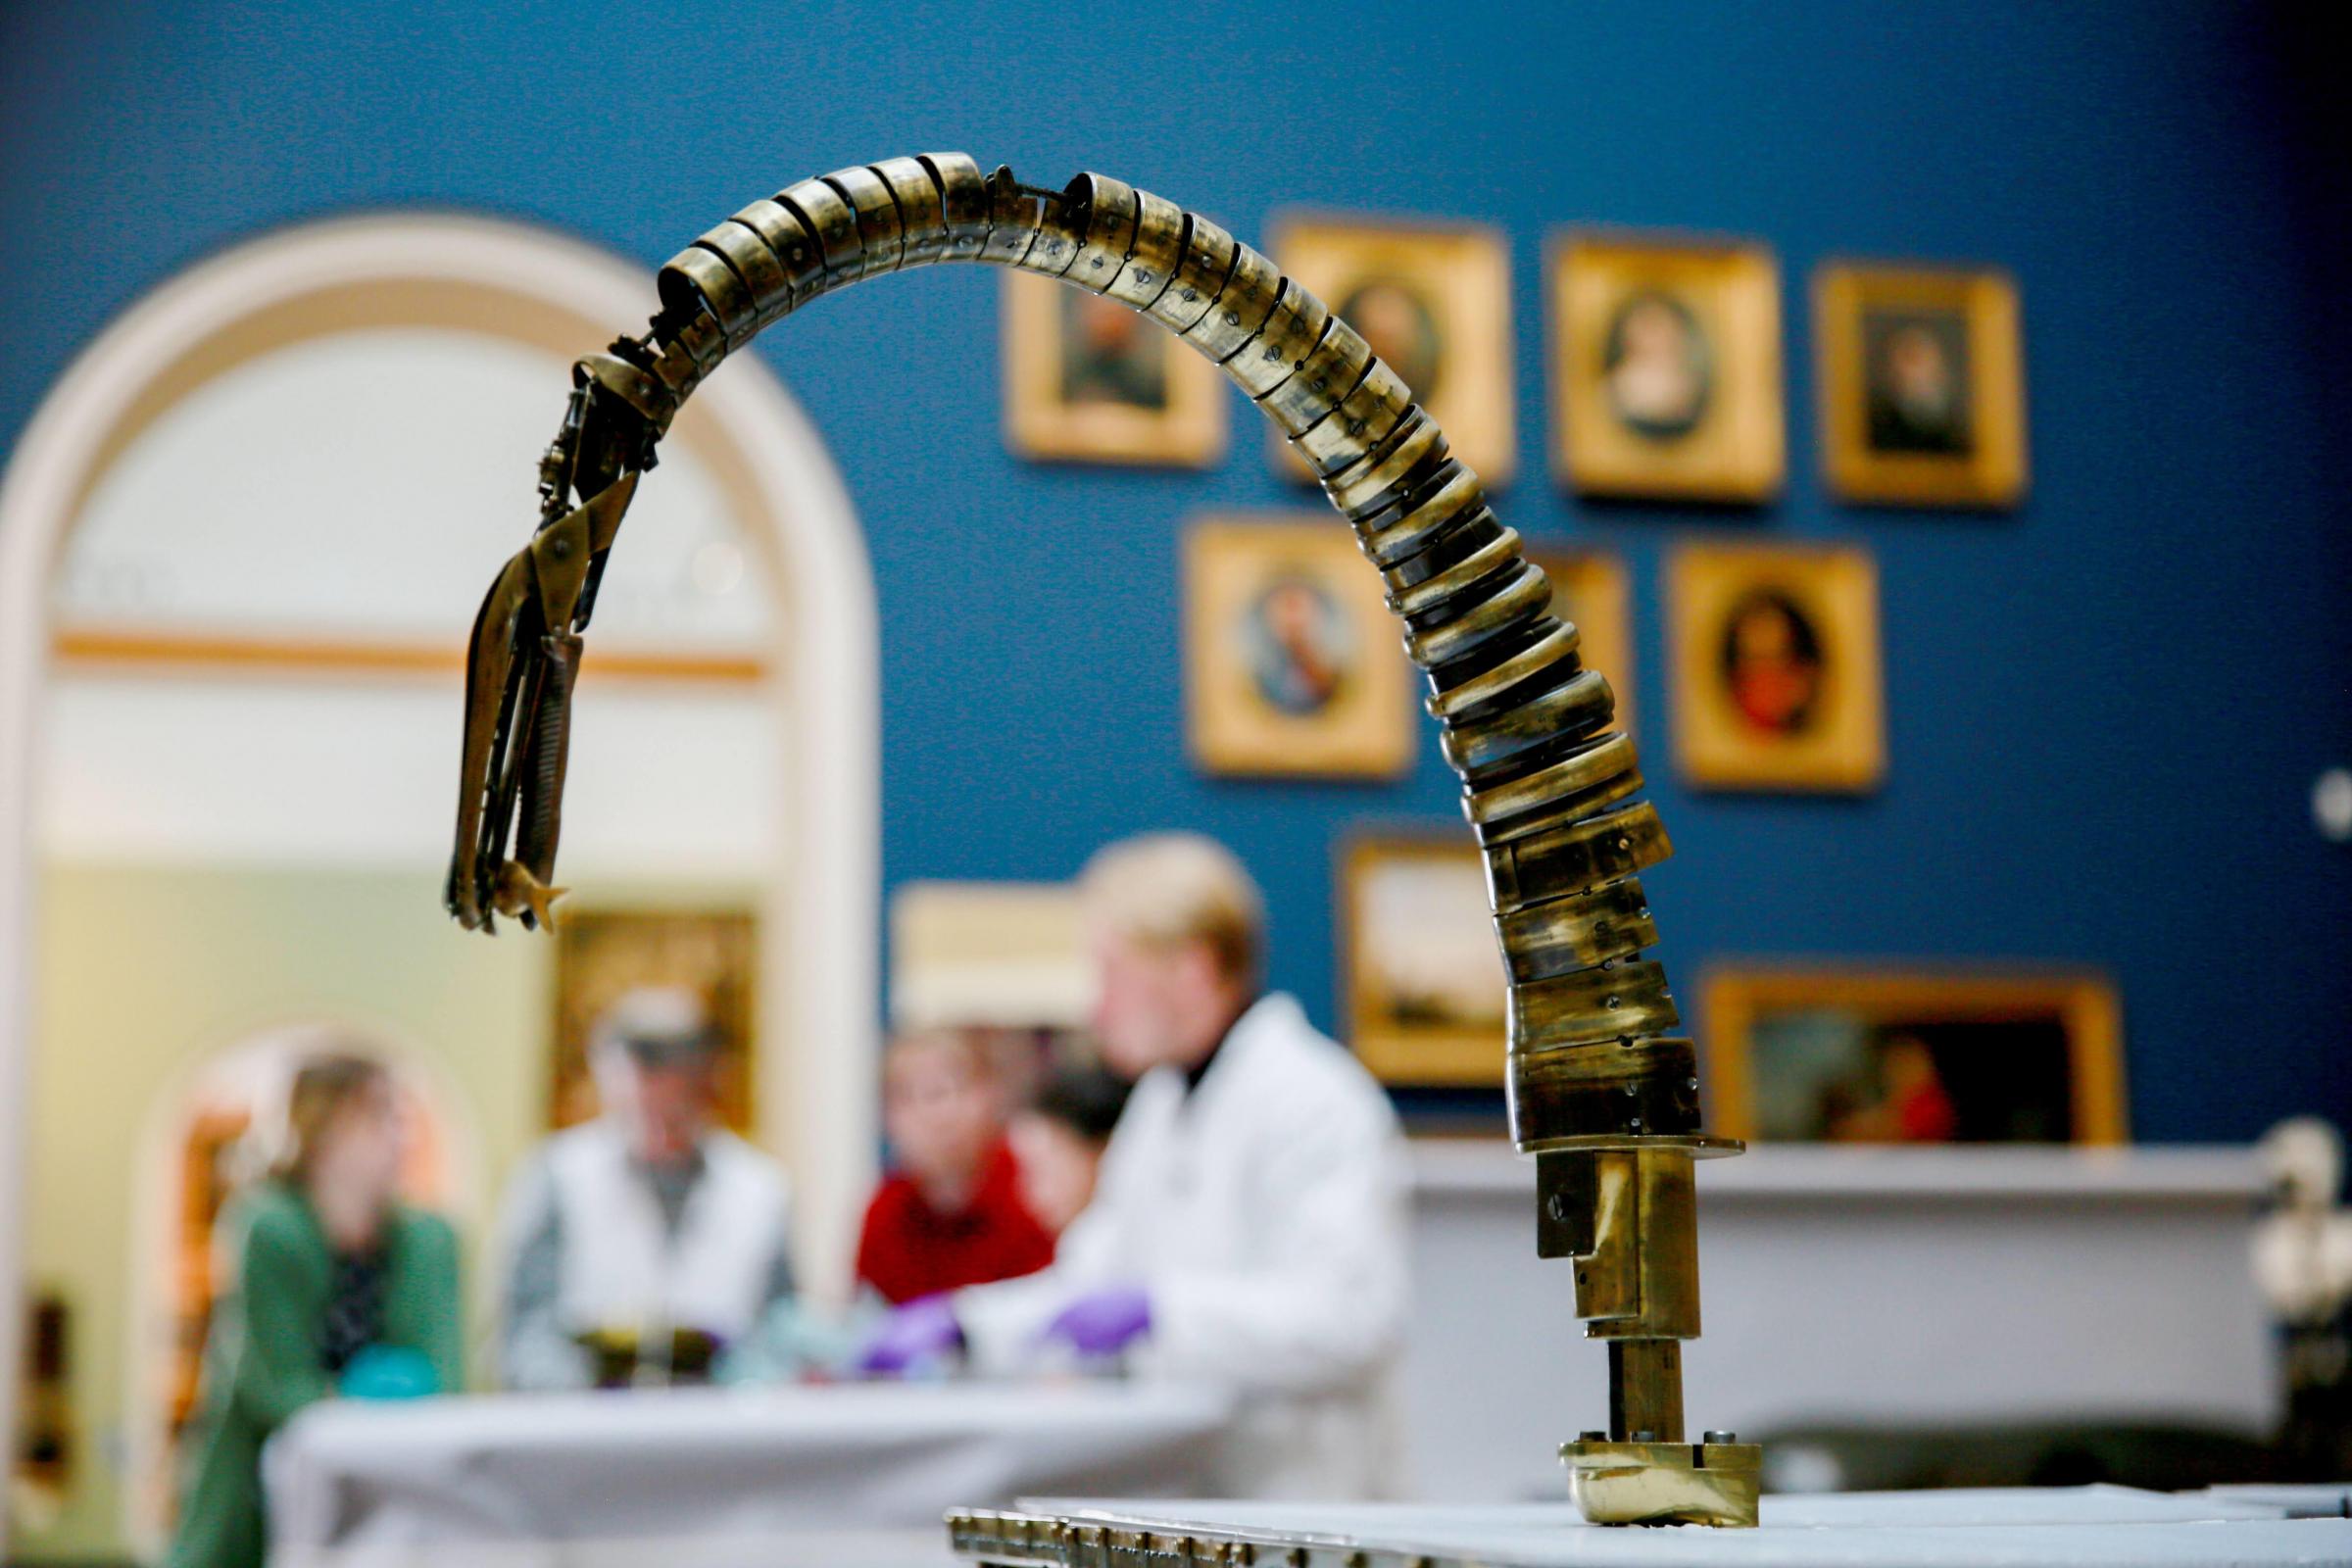 Conservators and curators studying the Bowes most iconic object 